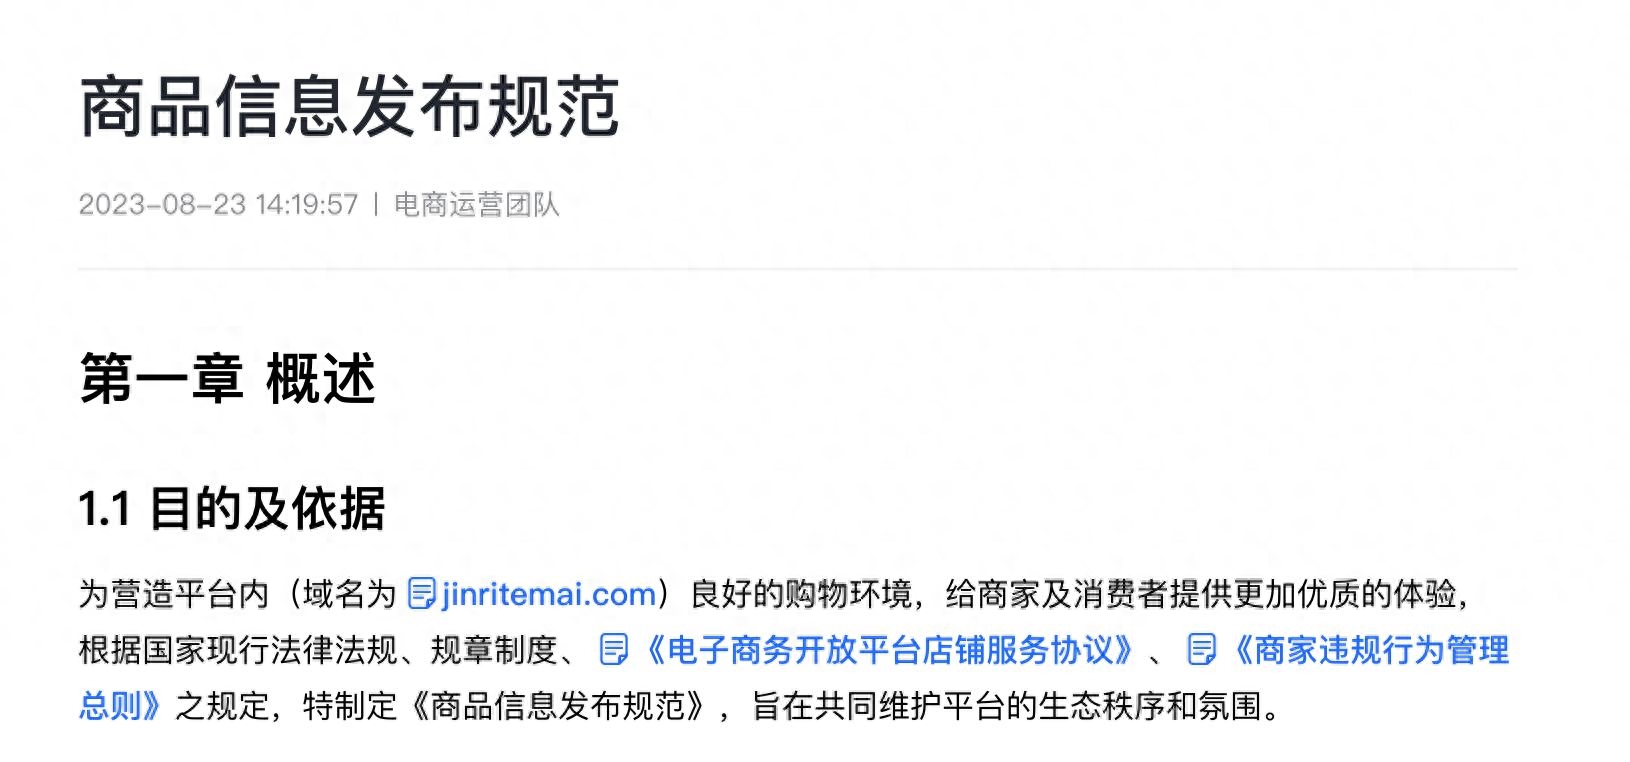 Douyin e-commerce released "Product Information Release Specifications", which applies to all merchants on the platform